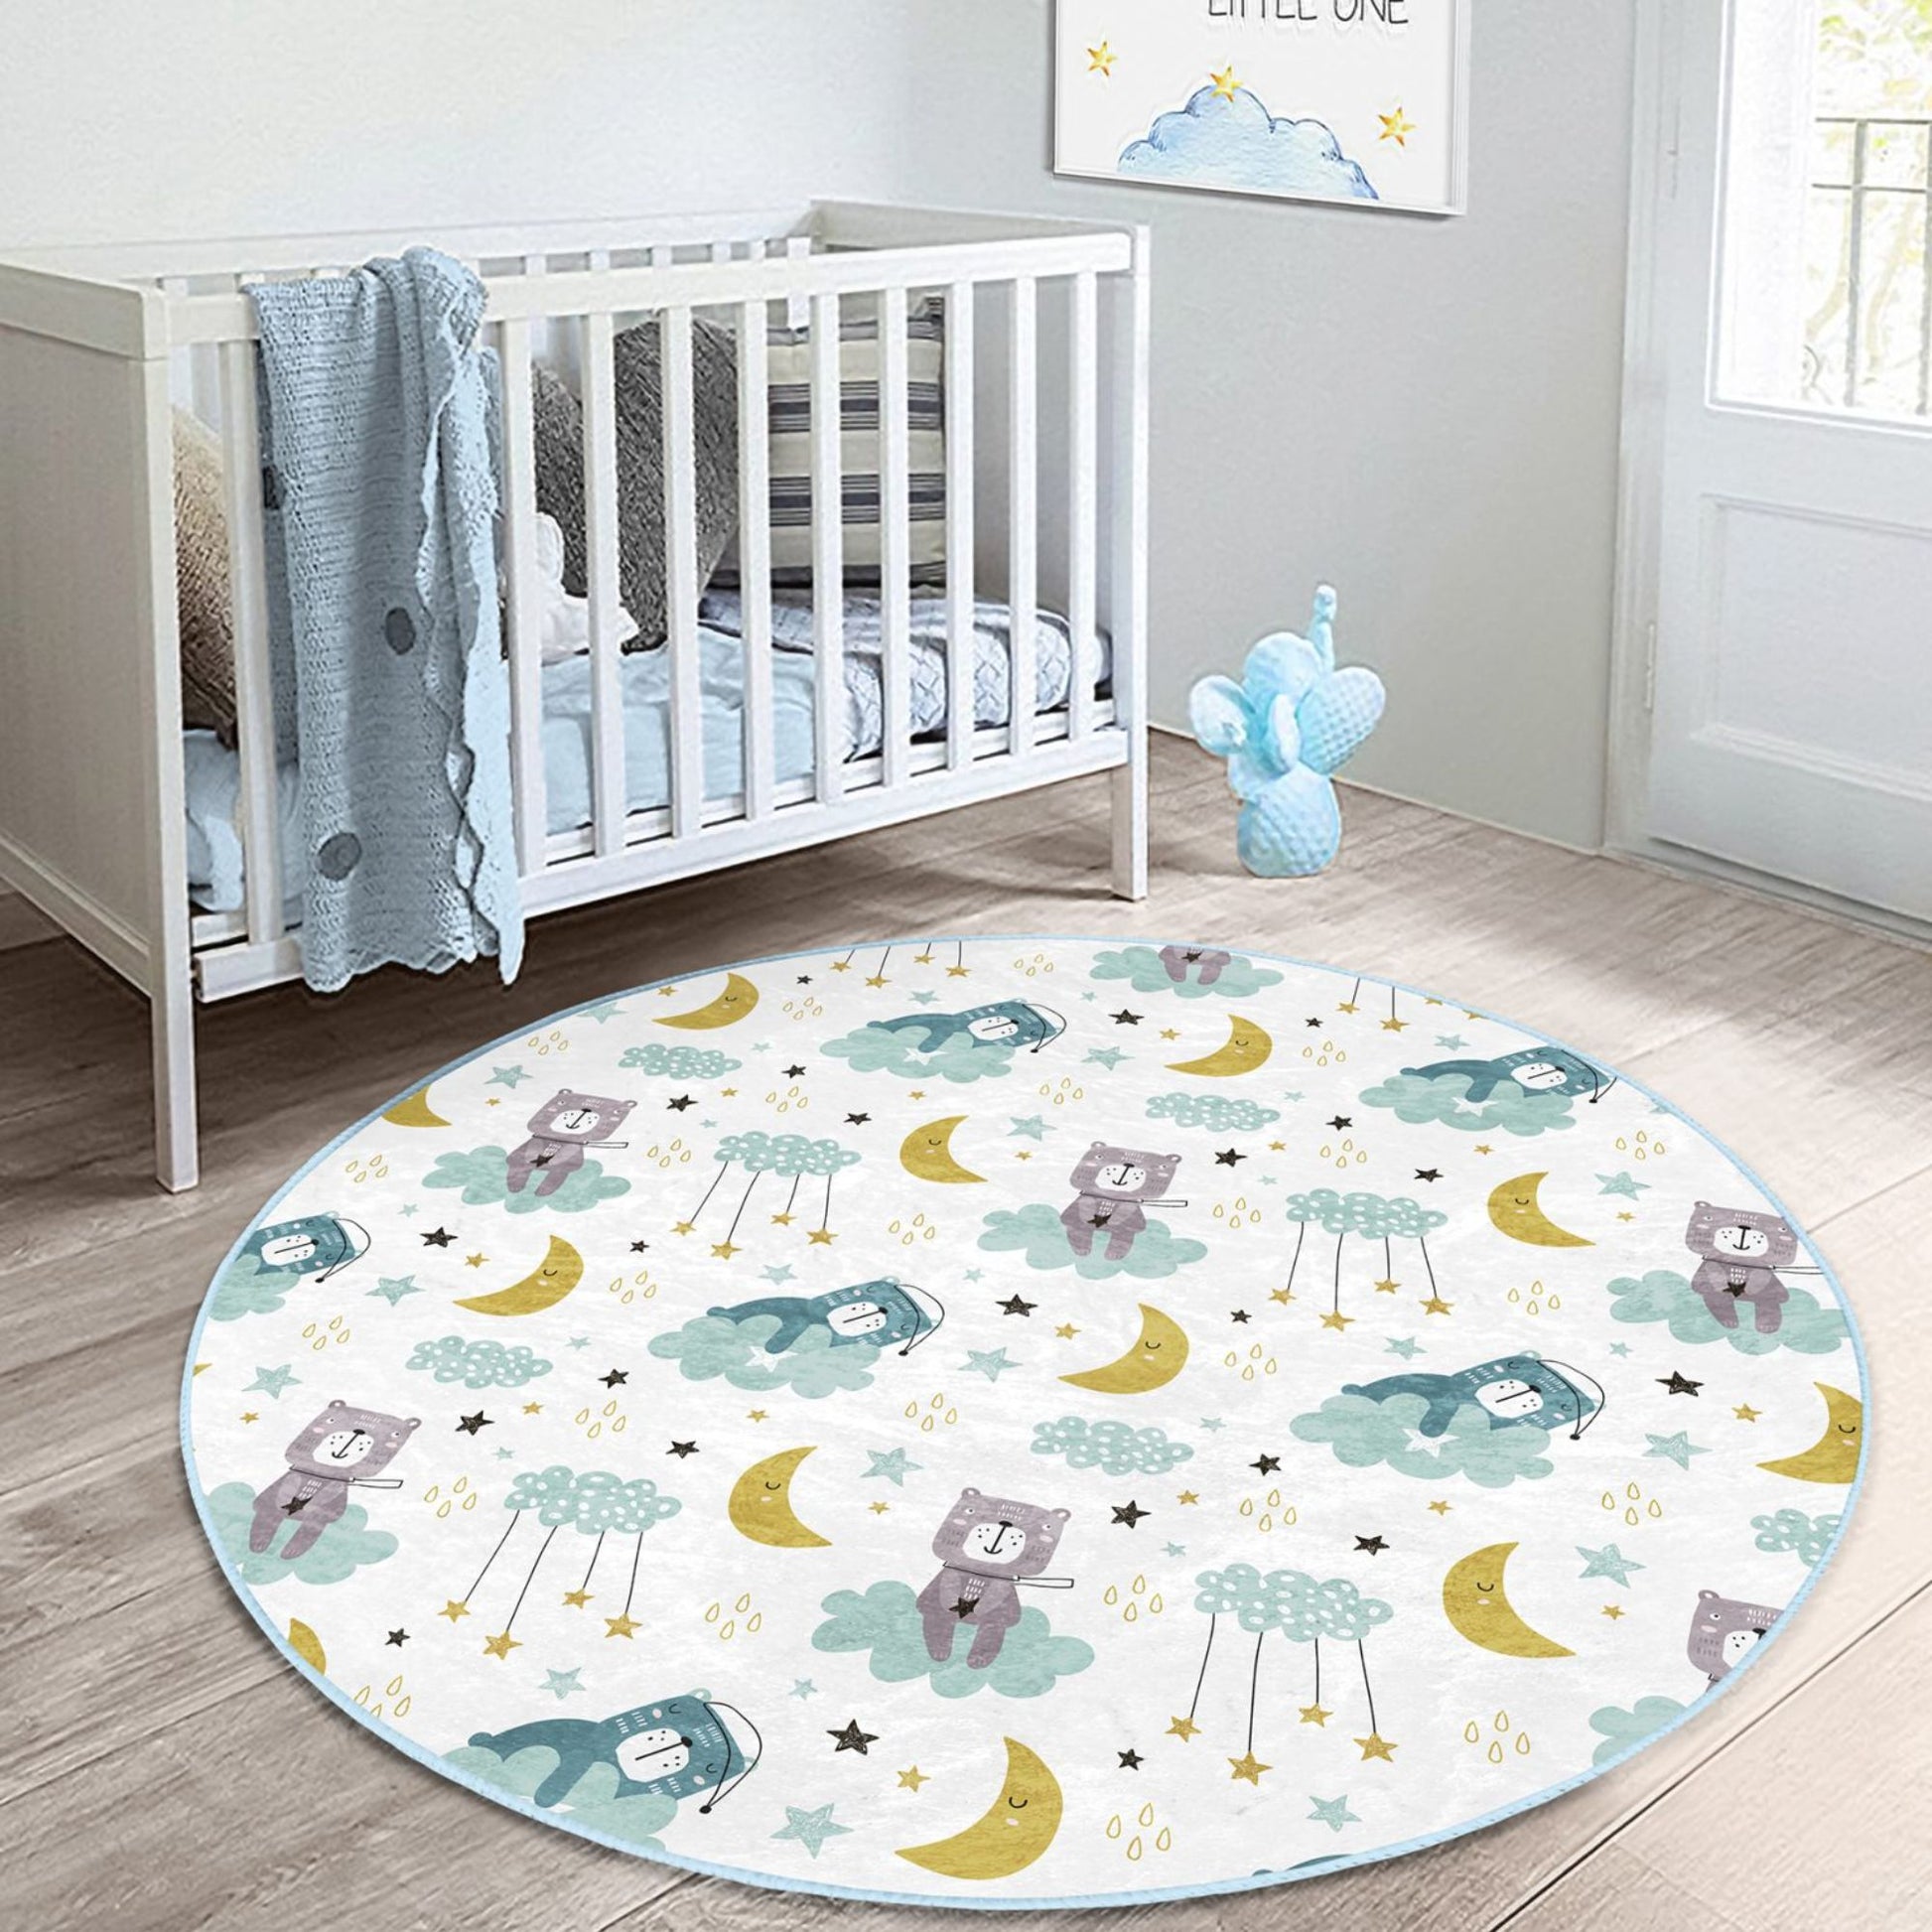 Easy-to-Clean Washable Rug for Kids' Comfort